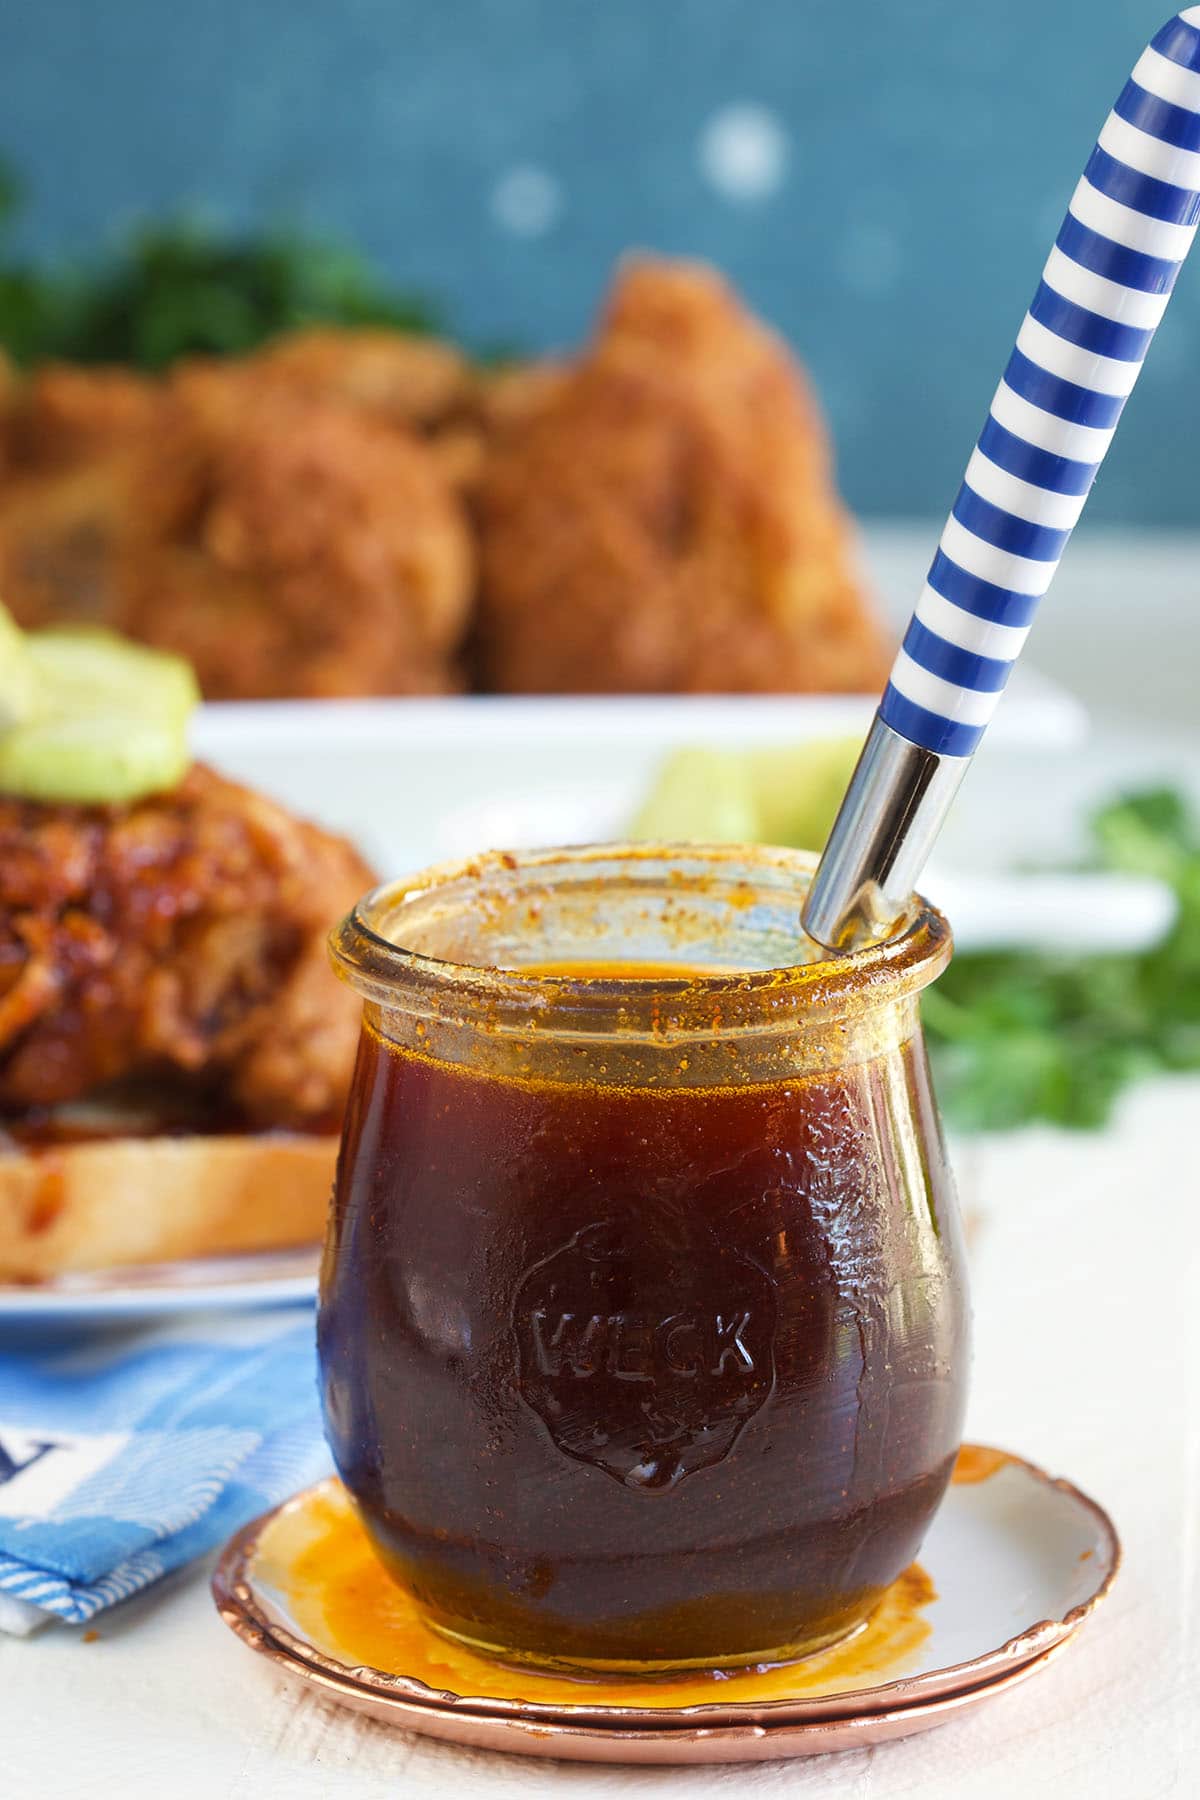 A spoon is placed in a jar of hot sauce.